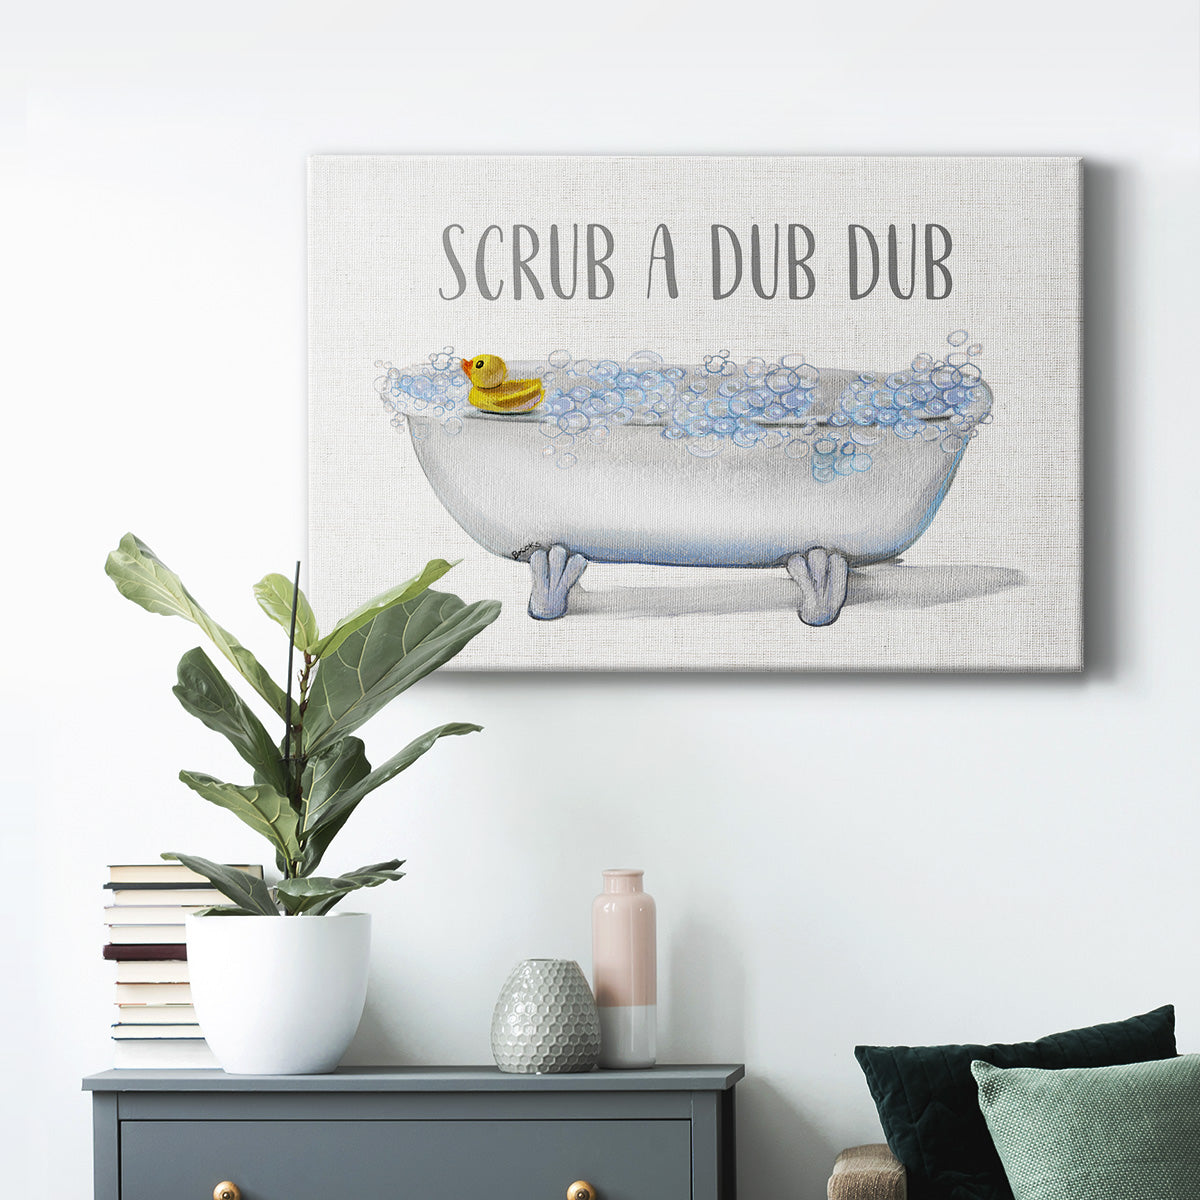 Scrub A Dub Premium Gallery Wrapped Canvas - Ready to Hang